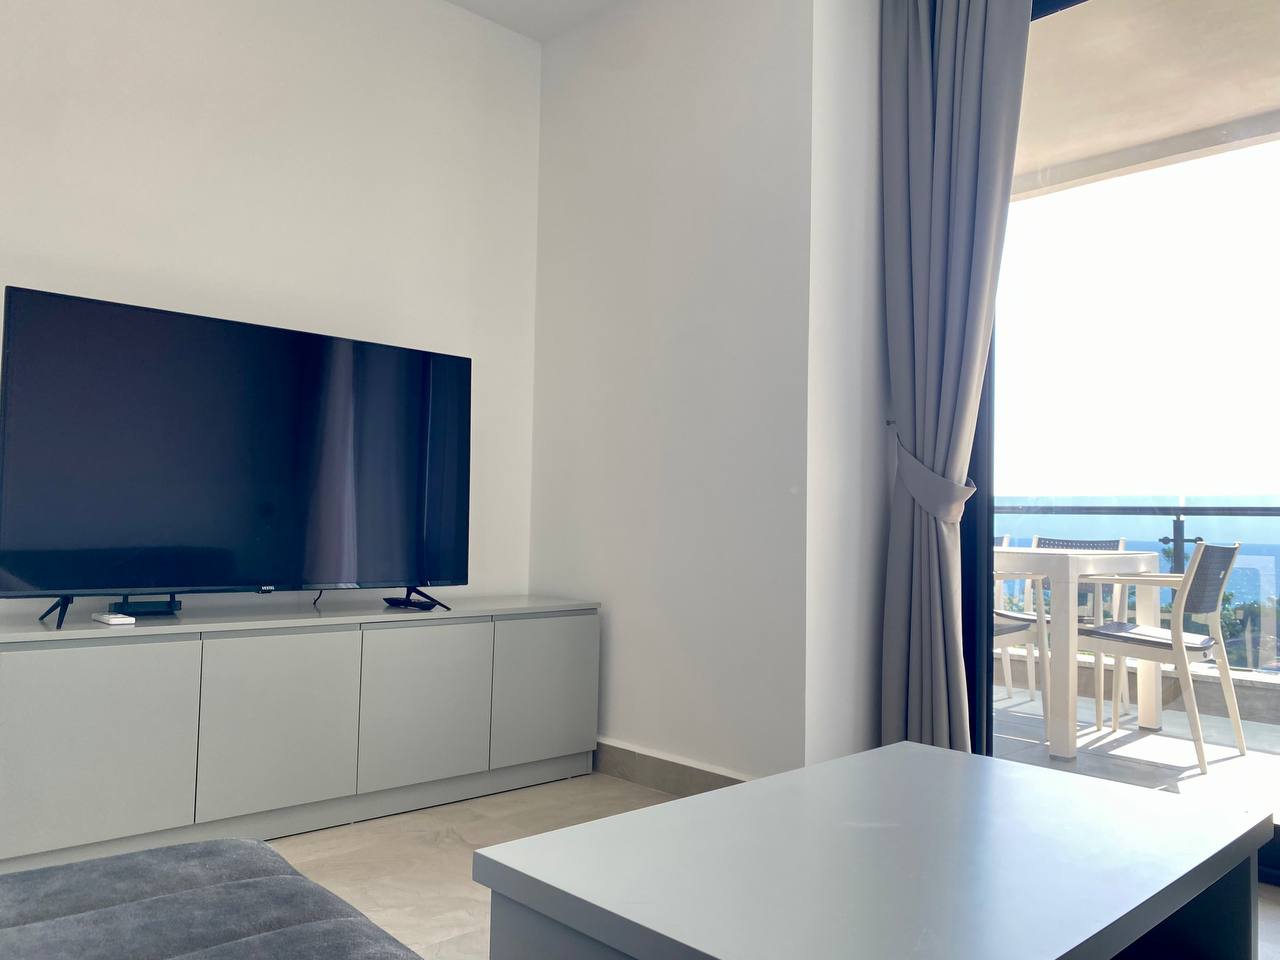 N°11 - Boutique 16 - 2 Bedrooms Sea Front, 6 People, Ultra Luxury